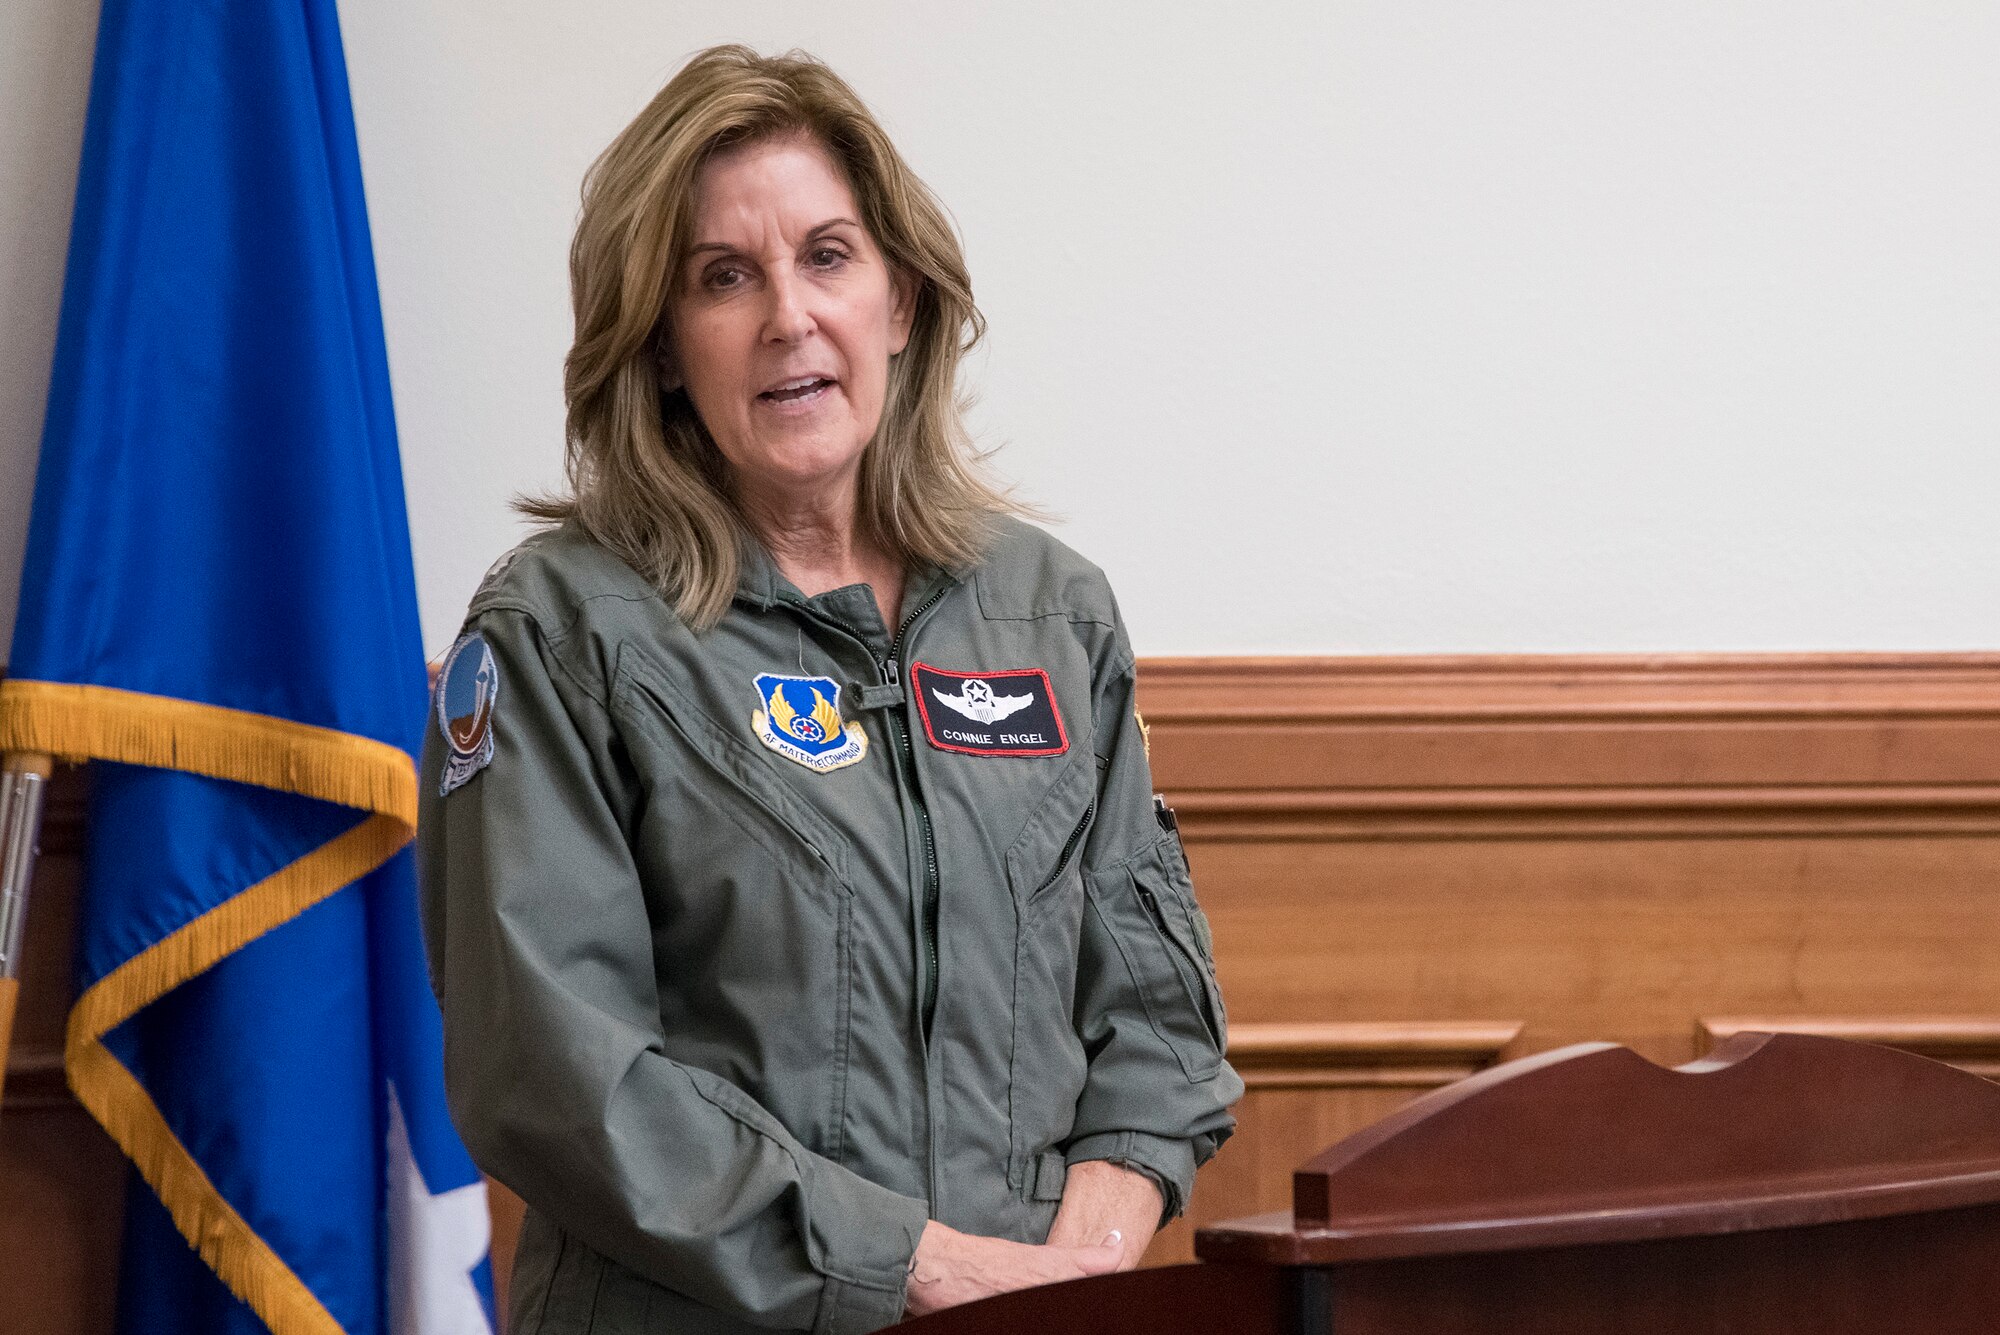 Retired U.S. Air Force Lt. Col. Connie Engel speaks about her experiences in undergraduate pilot training during the Trailblazer Room dedication ceremony June 29, 2020, at Joint Base San Antonio-Randolph, TX. Located in the AETC headquarters main building, the newly renamed Trailblazer Room was dedicated to the first 10 women who earned their silver wings Sept. 2, 1977. (U.S. Air Force photo by Sean M. Worrell)